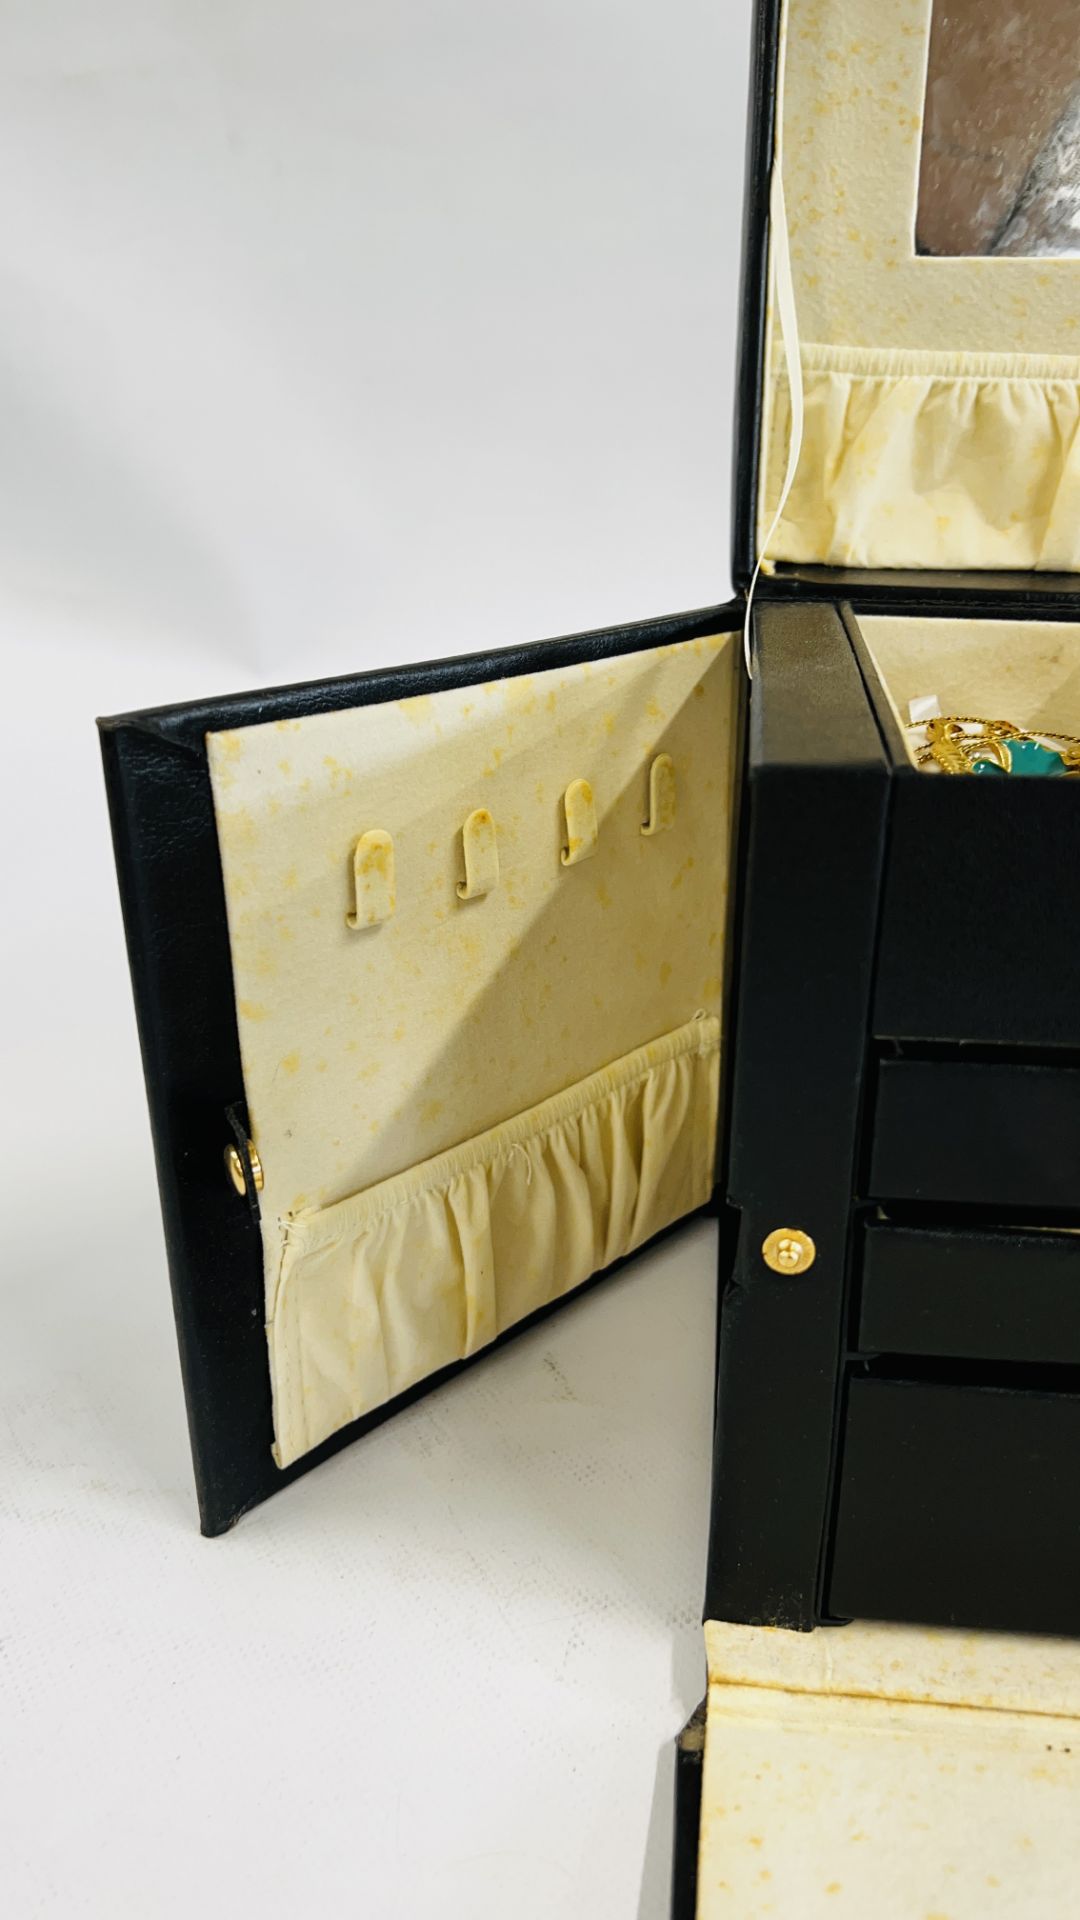 A SELECTION OF COSTUME JEWELLERY IN A LARGE BLACK JEWELLERY BOX. - Image 9 of 10